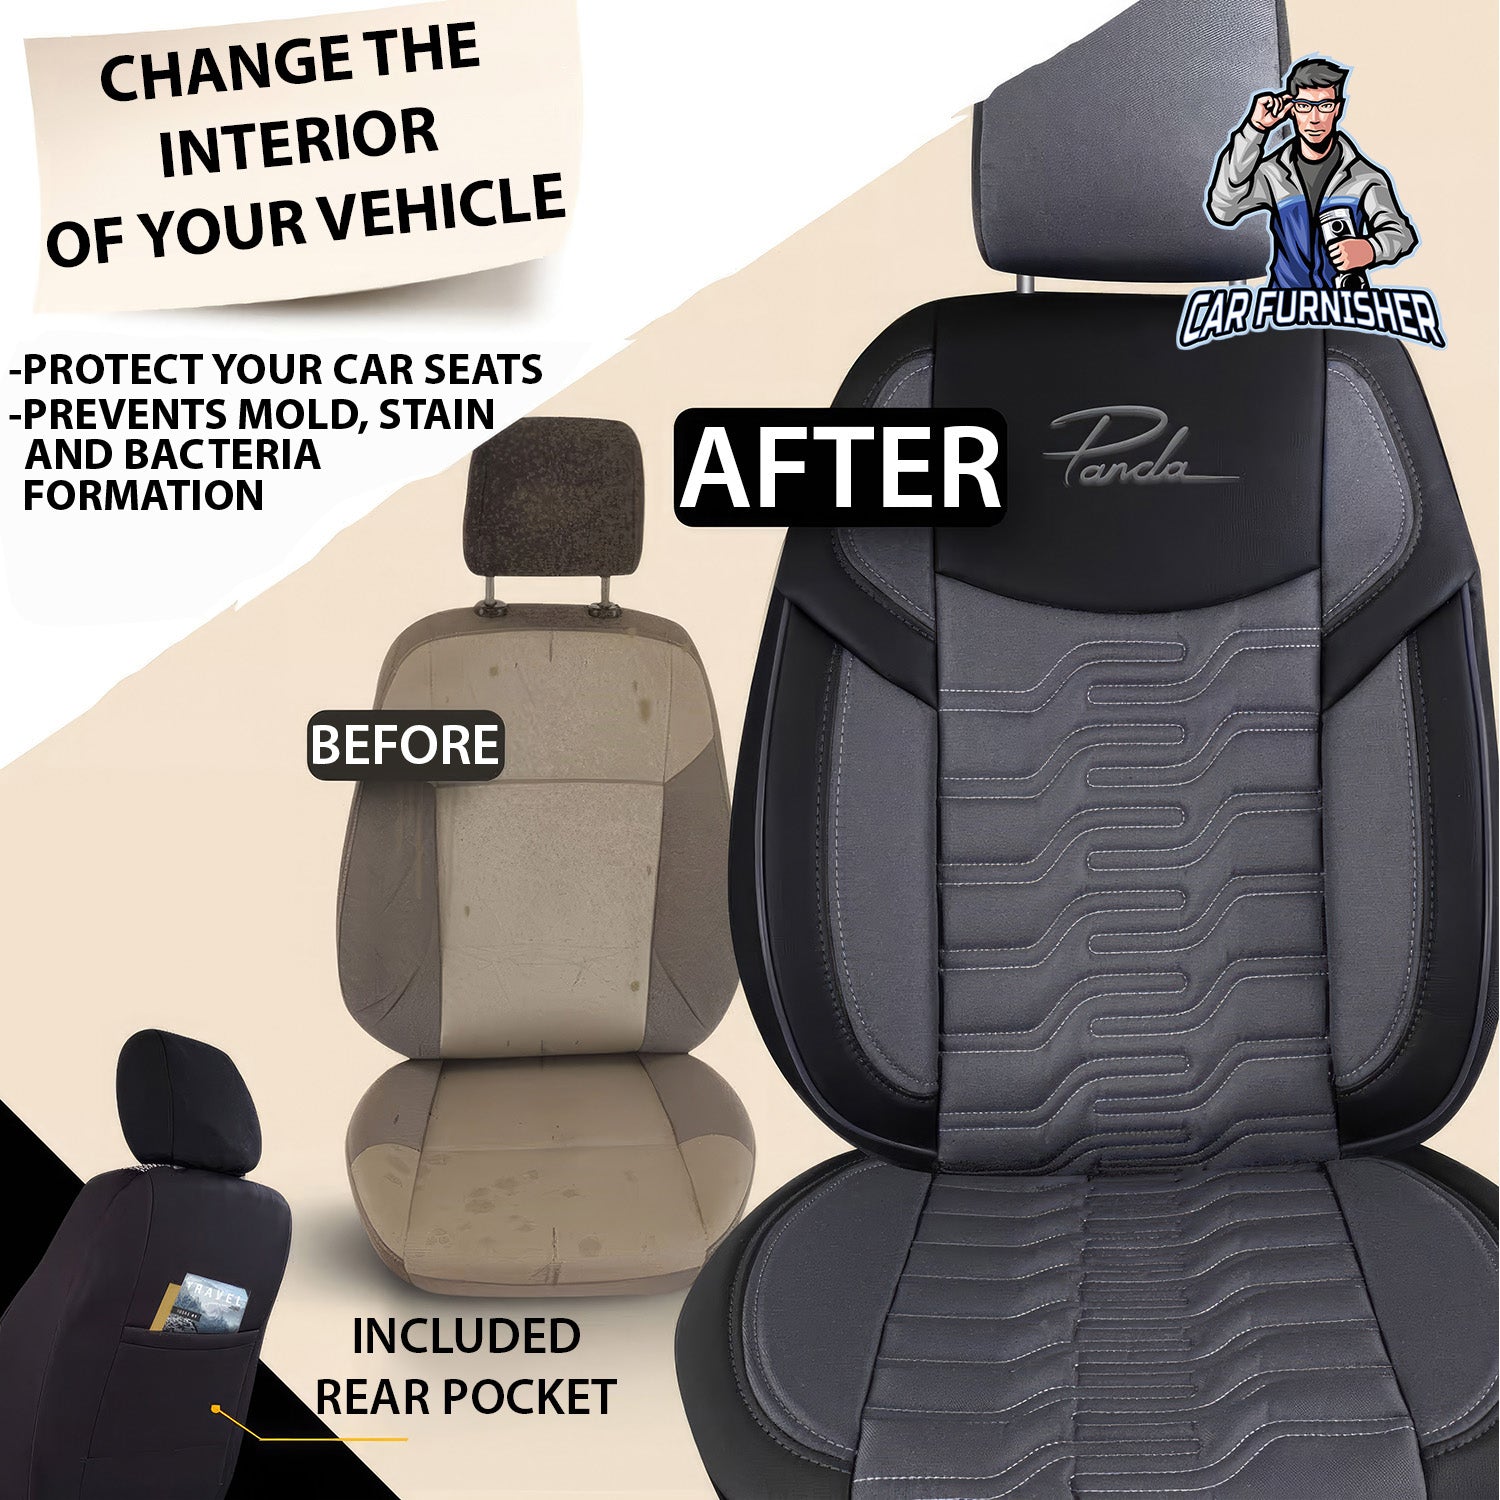 Car Seat Cover Set - Berlin Design Smoked 5 Seats + Headrests (Full Set) Leather & Jacquard Fabric